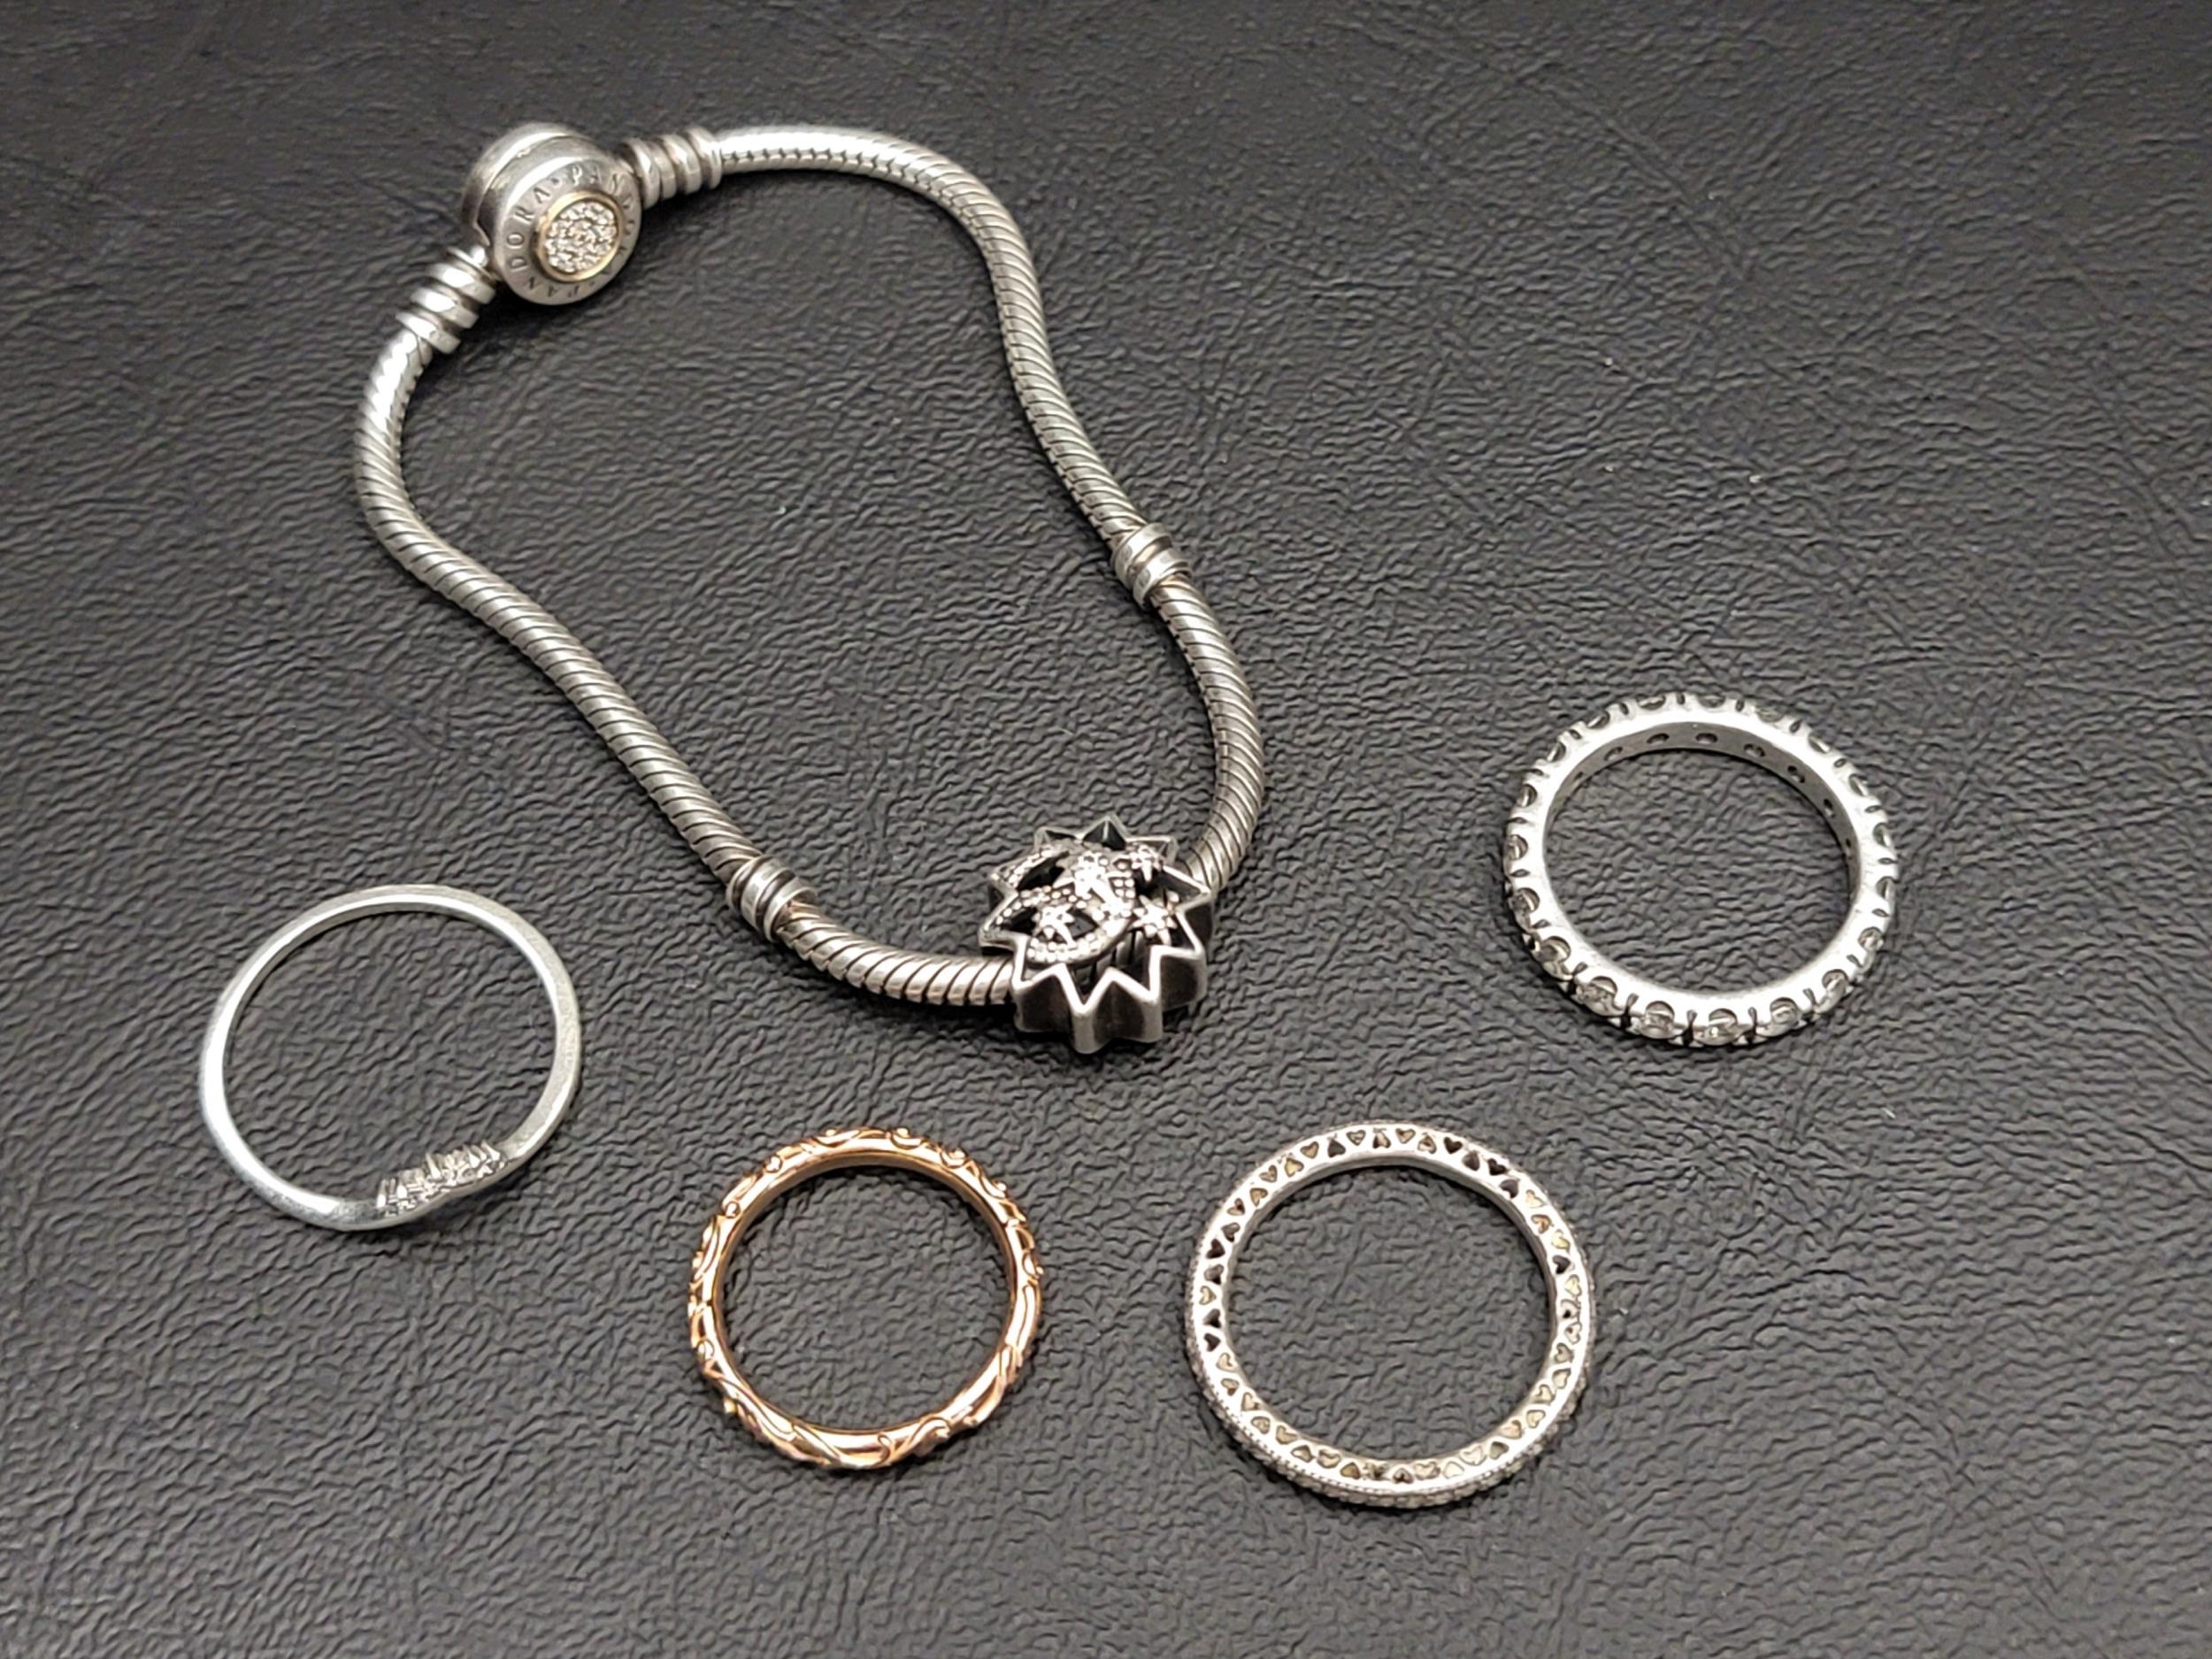 SELECTION OF PANDORA JEWELLERY comprising a Moments Logo Clasp Snake Chain Bracelet with a Disney